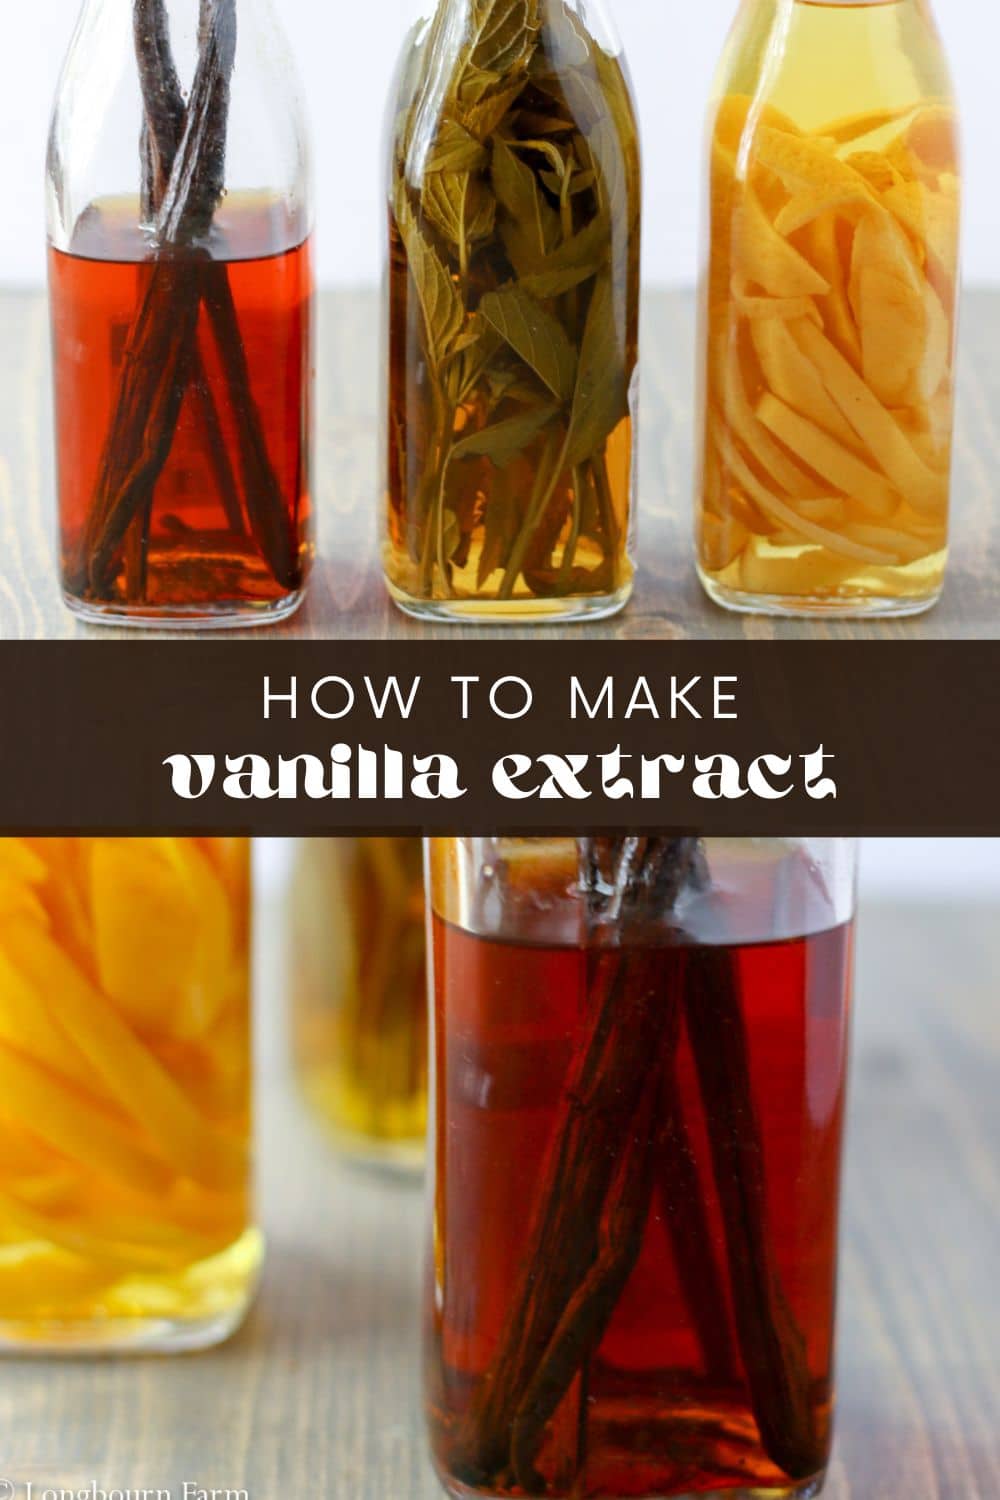 Learn how to make vanilla extract! Very detailed instructions to give you all the information you need. Homemade vanilla extract is easy and fun to make!